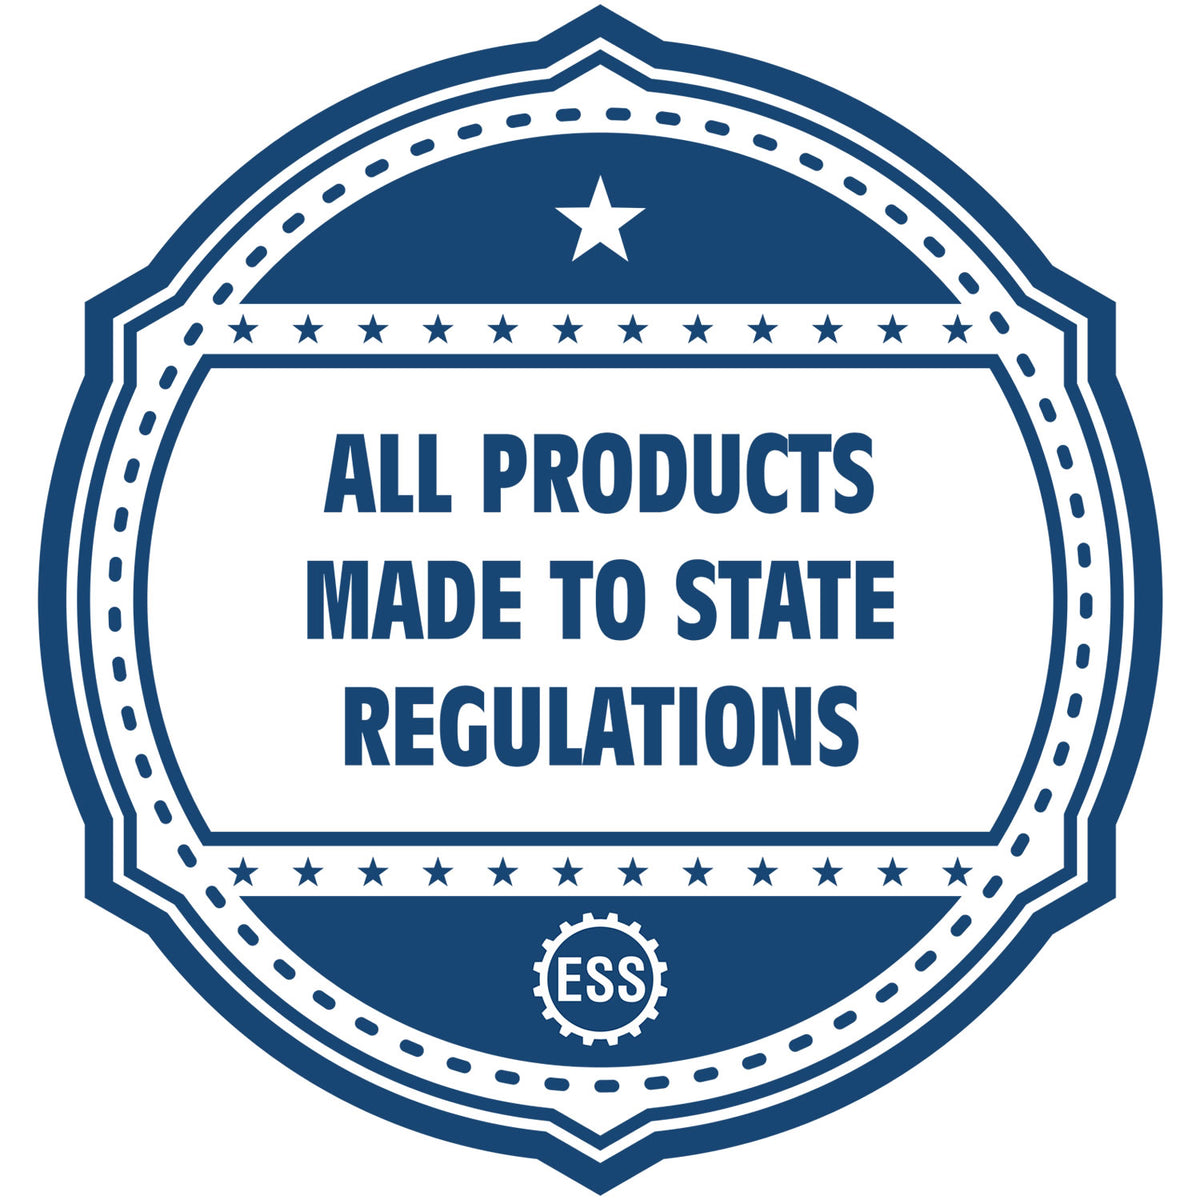 An icon or badge element for the Self-Inking Maryland Landscape Architect Stamp showing that this product is made in compliance with state regulations.